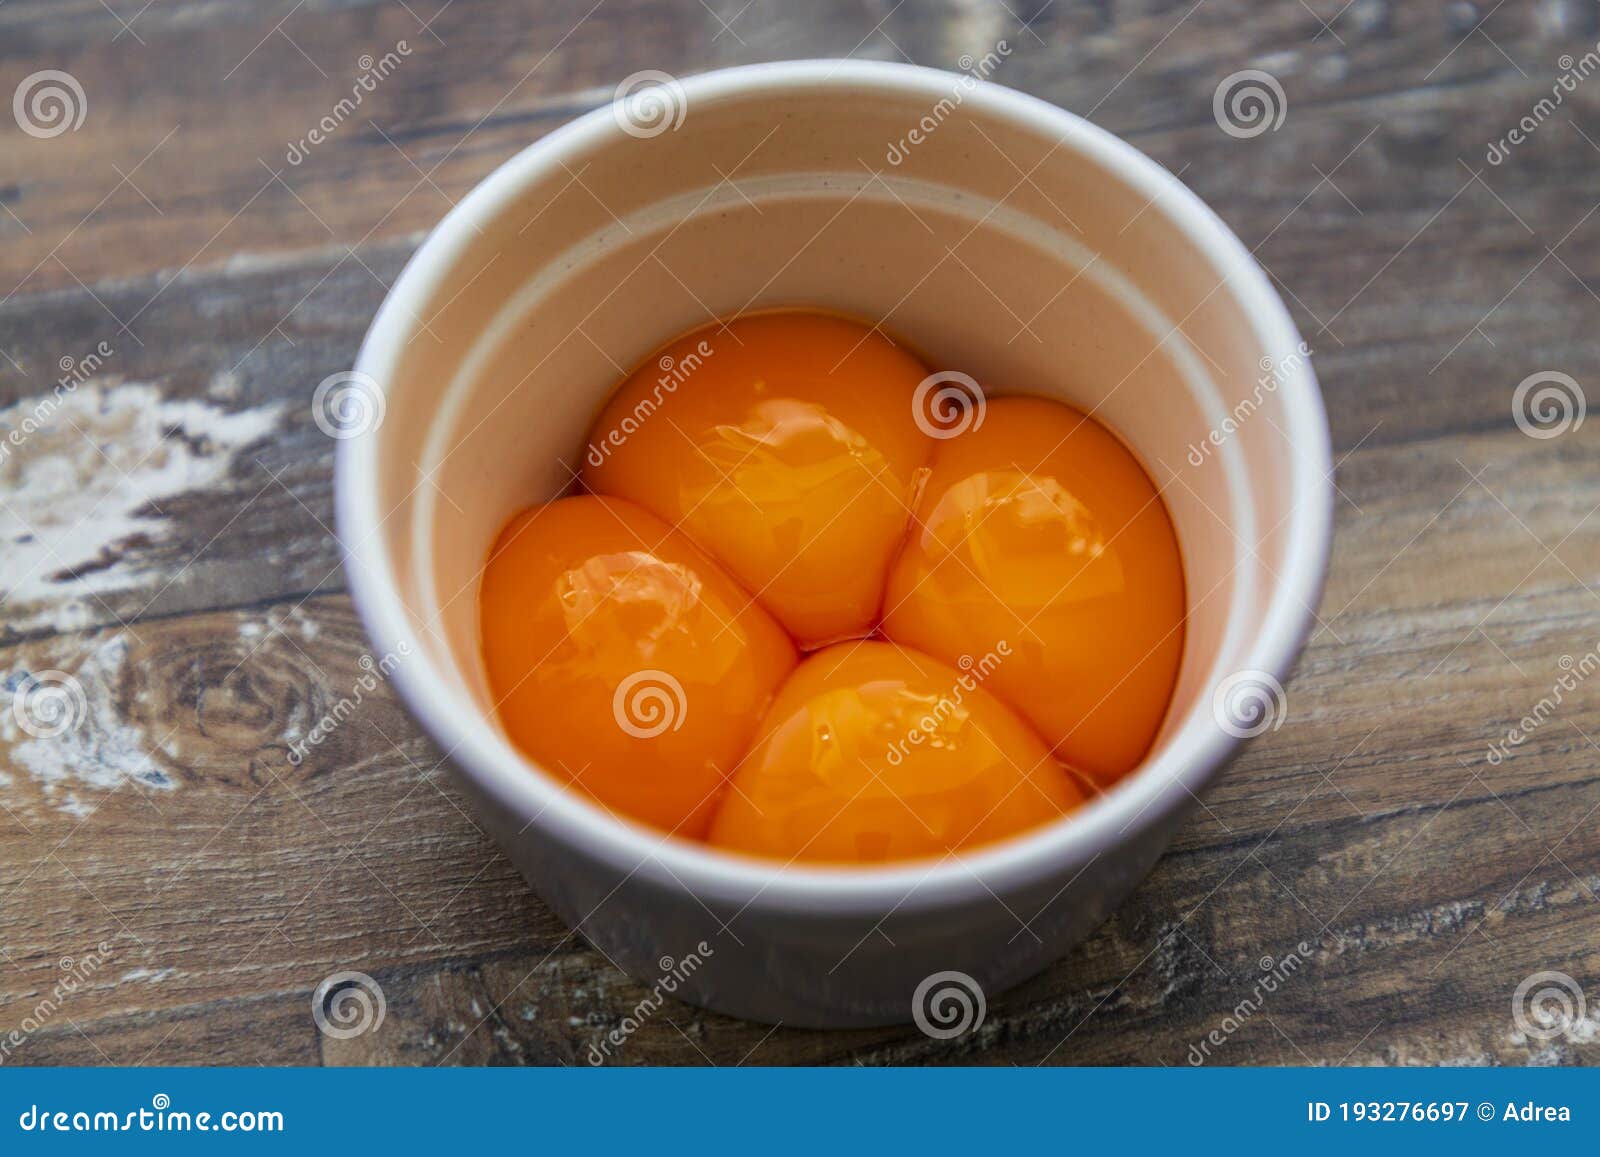 separated yolks from albumen in a small bole